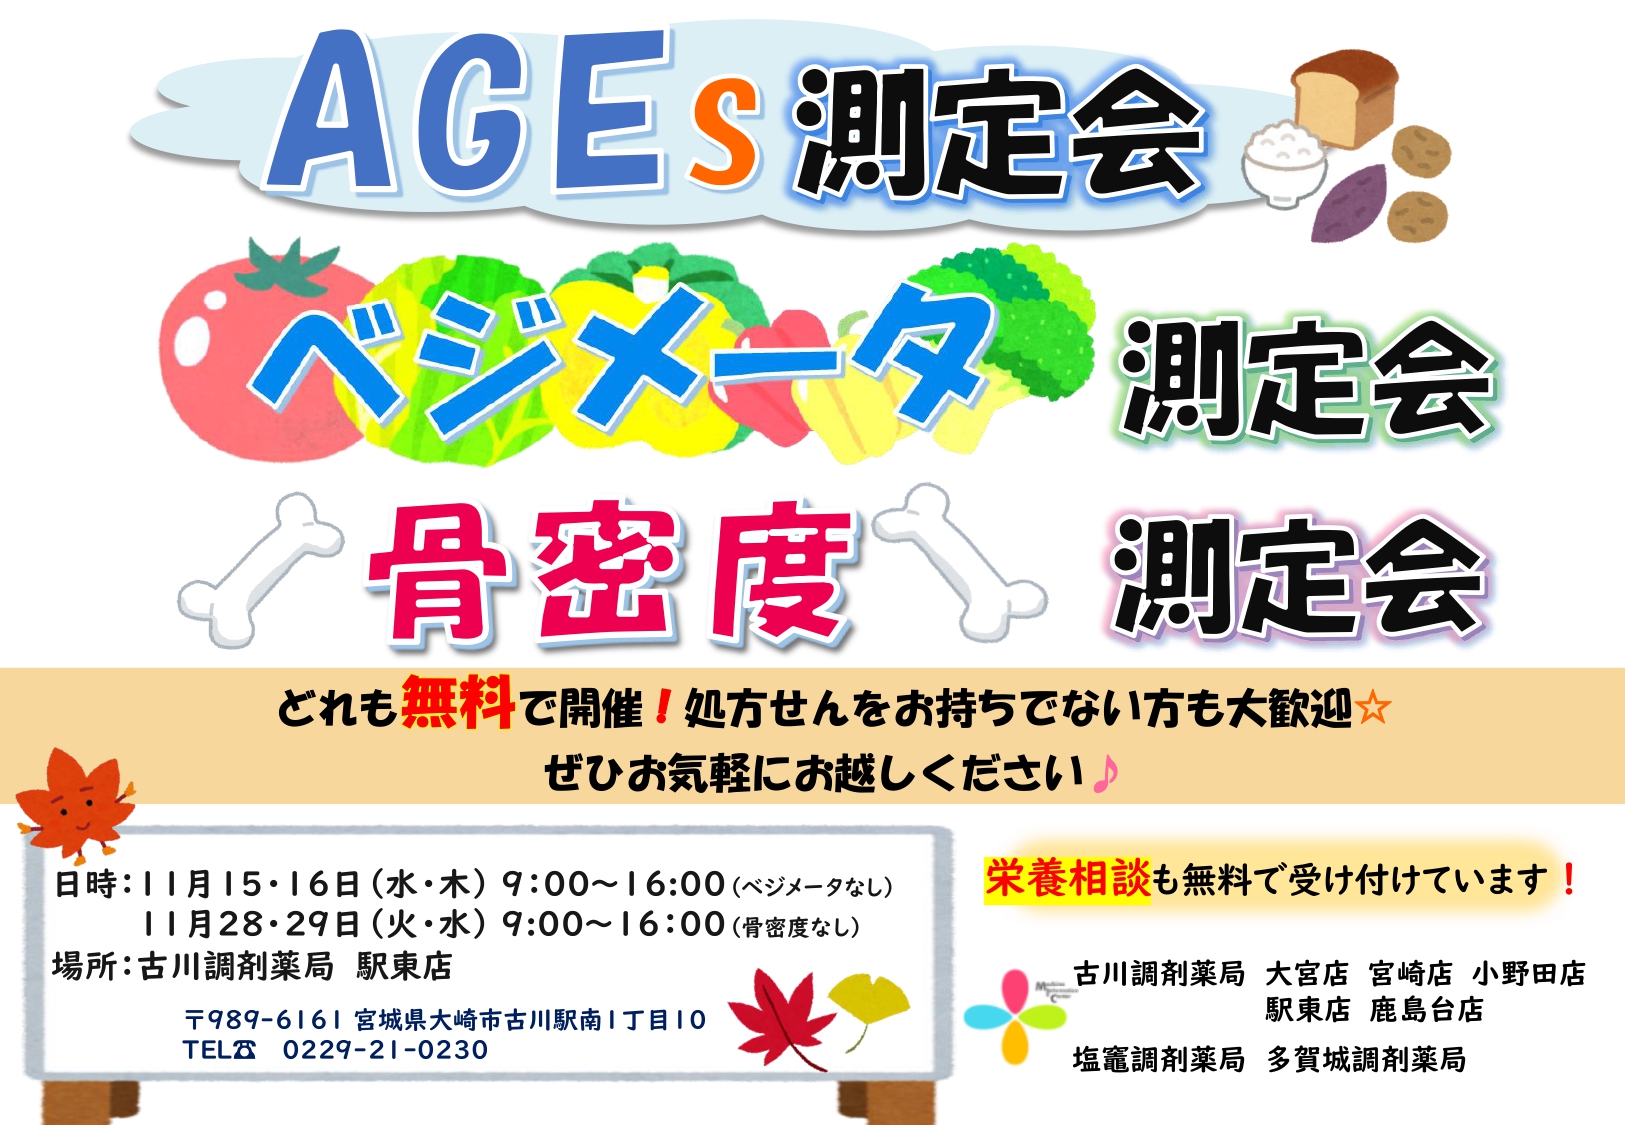 AGEs・ベジメータ・骨密度測定会 告知用紙(2023.11月駅東店)_page-0001